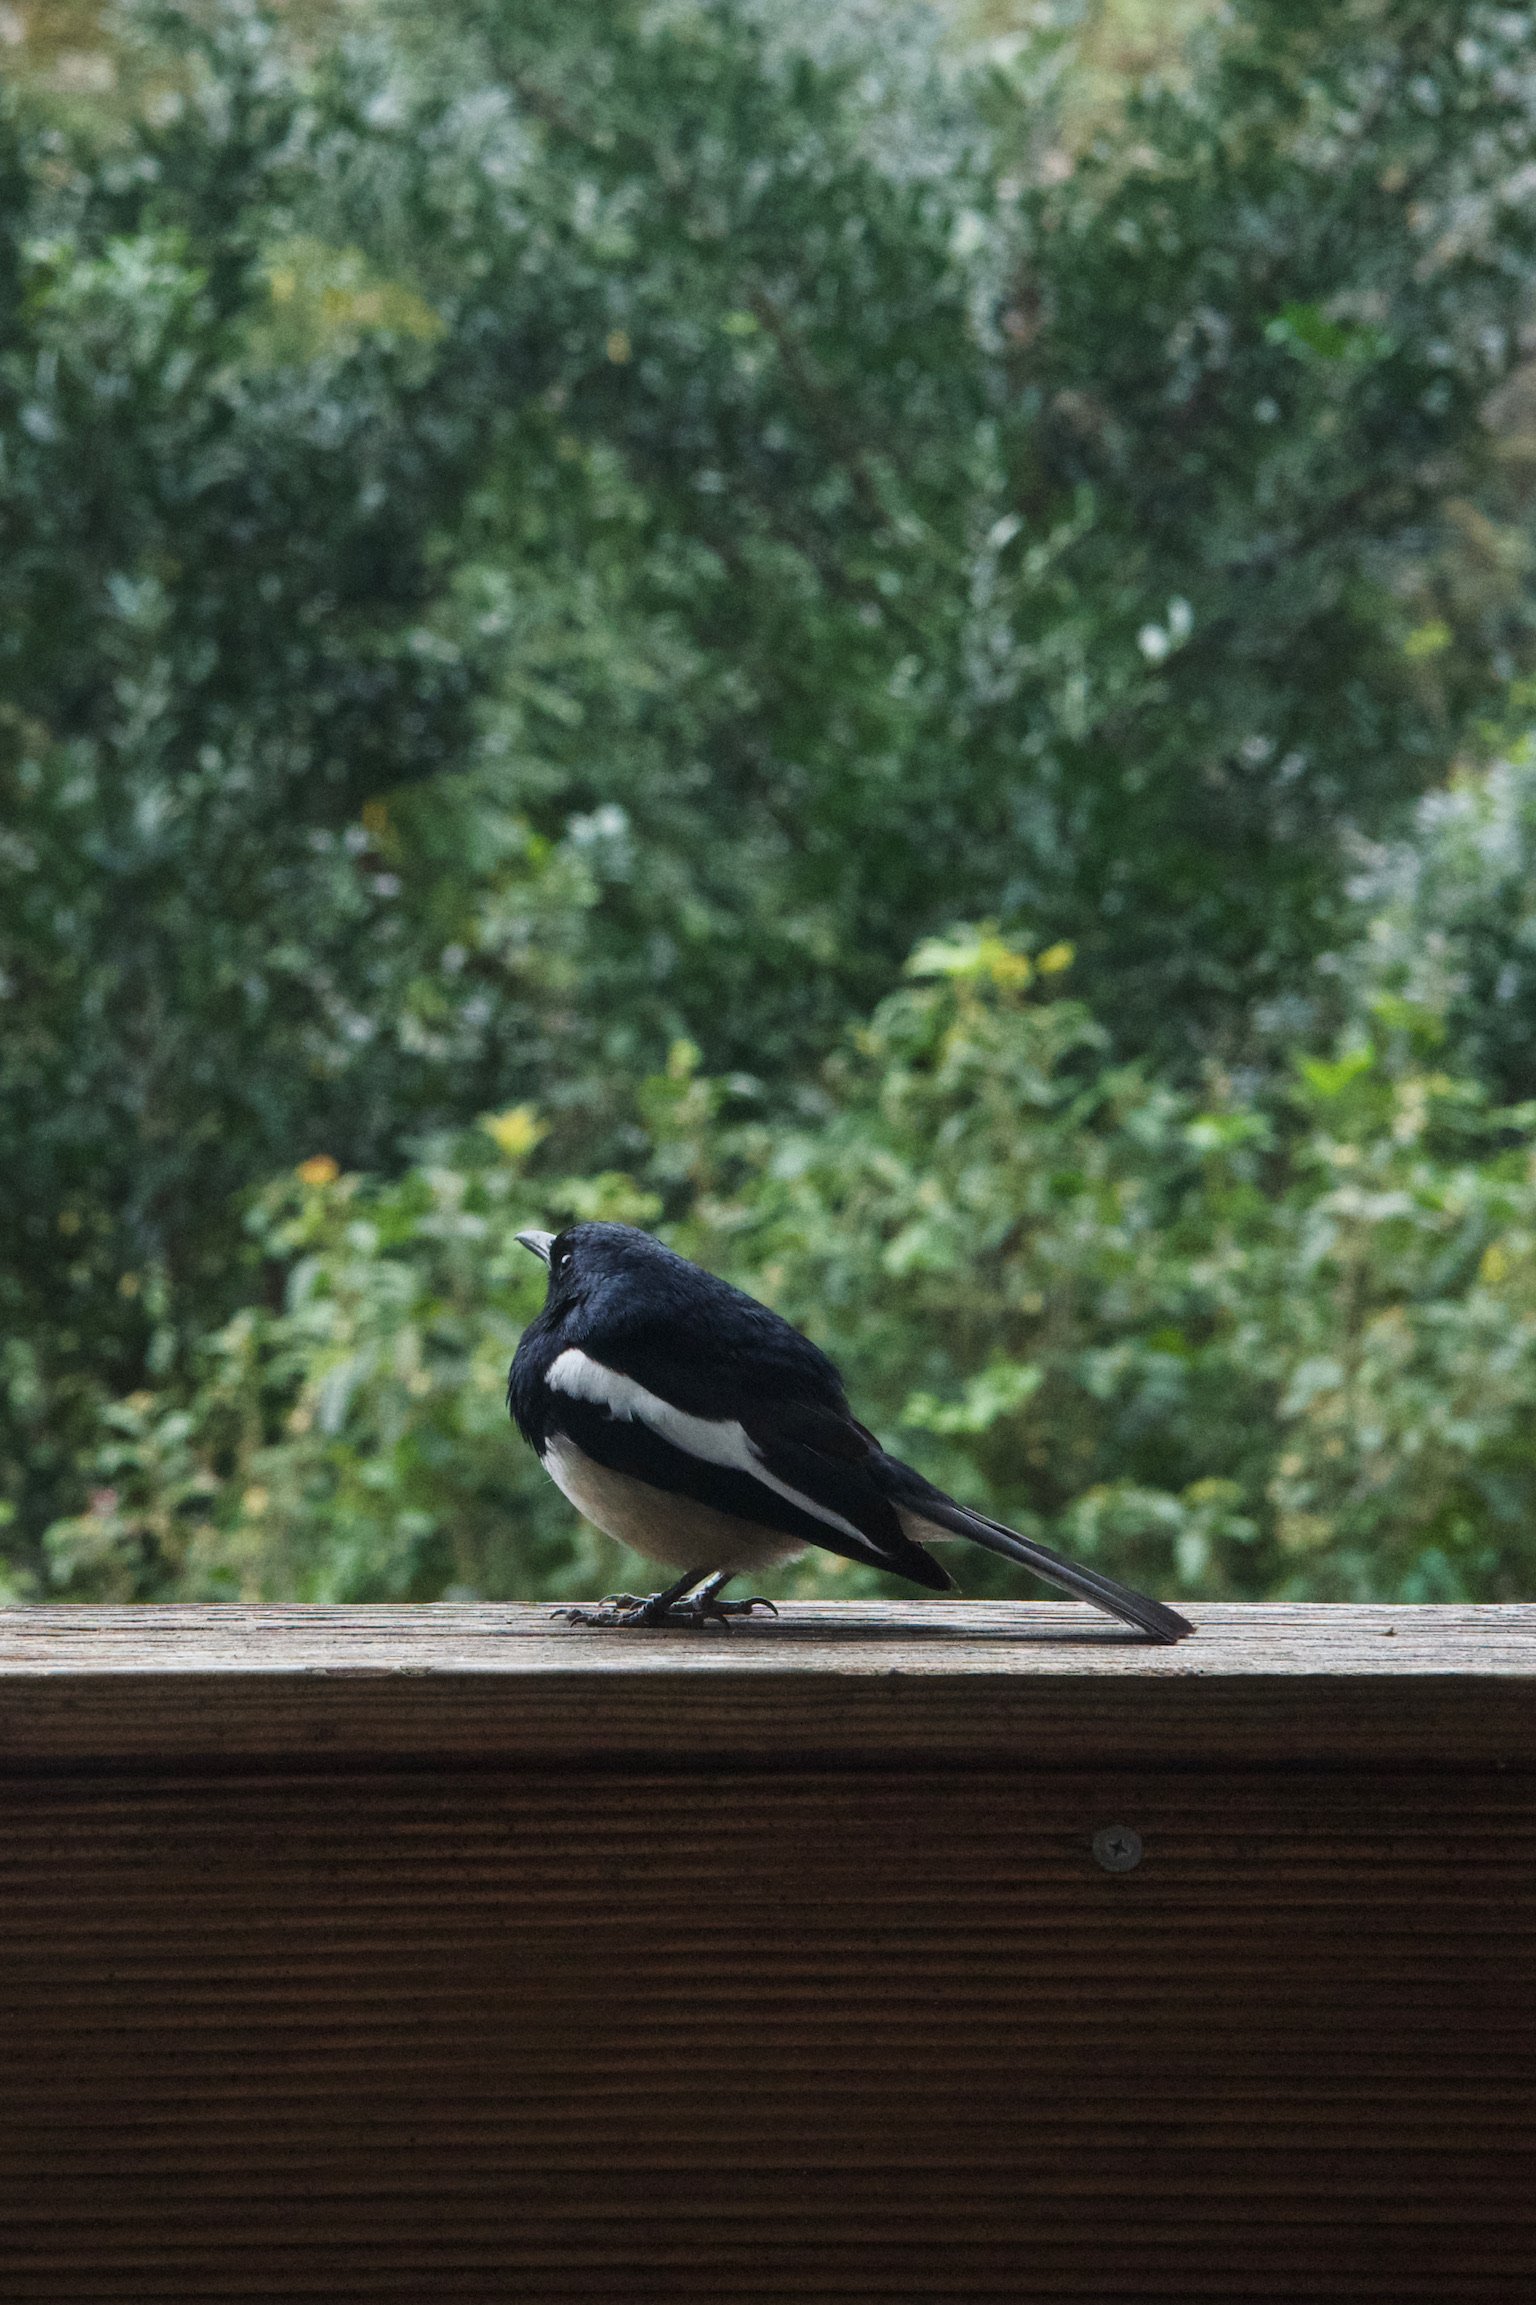 A magpie standing on wooden balcony looking to the left, lots of trees in the background.